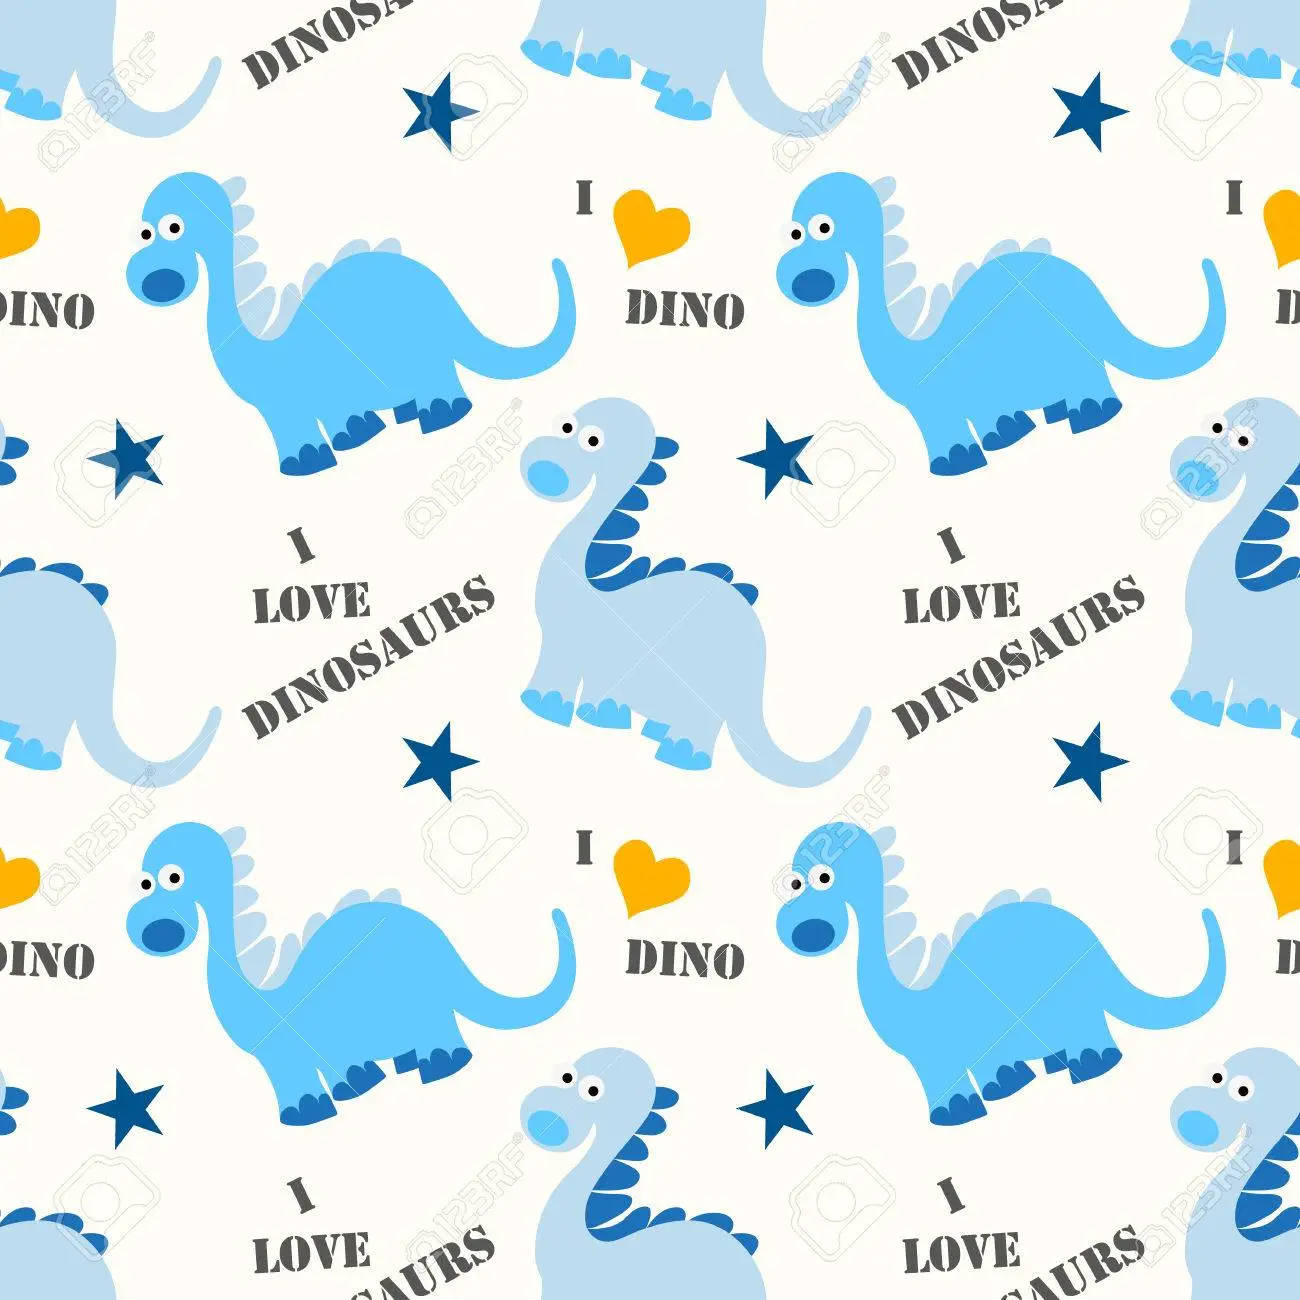 Brighten up your home with this cute dinosaur pattern! Wallpaper